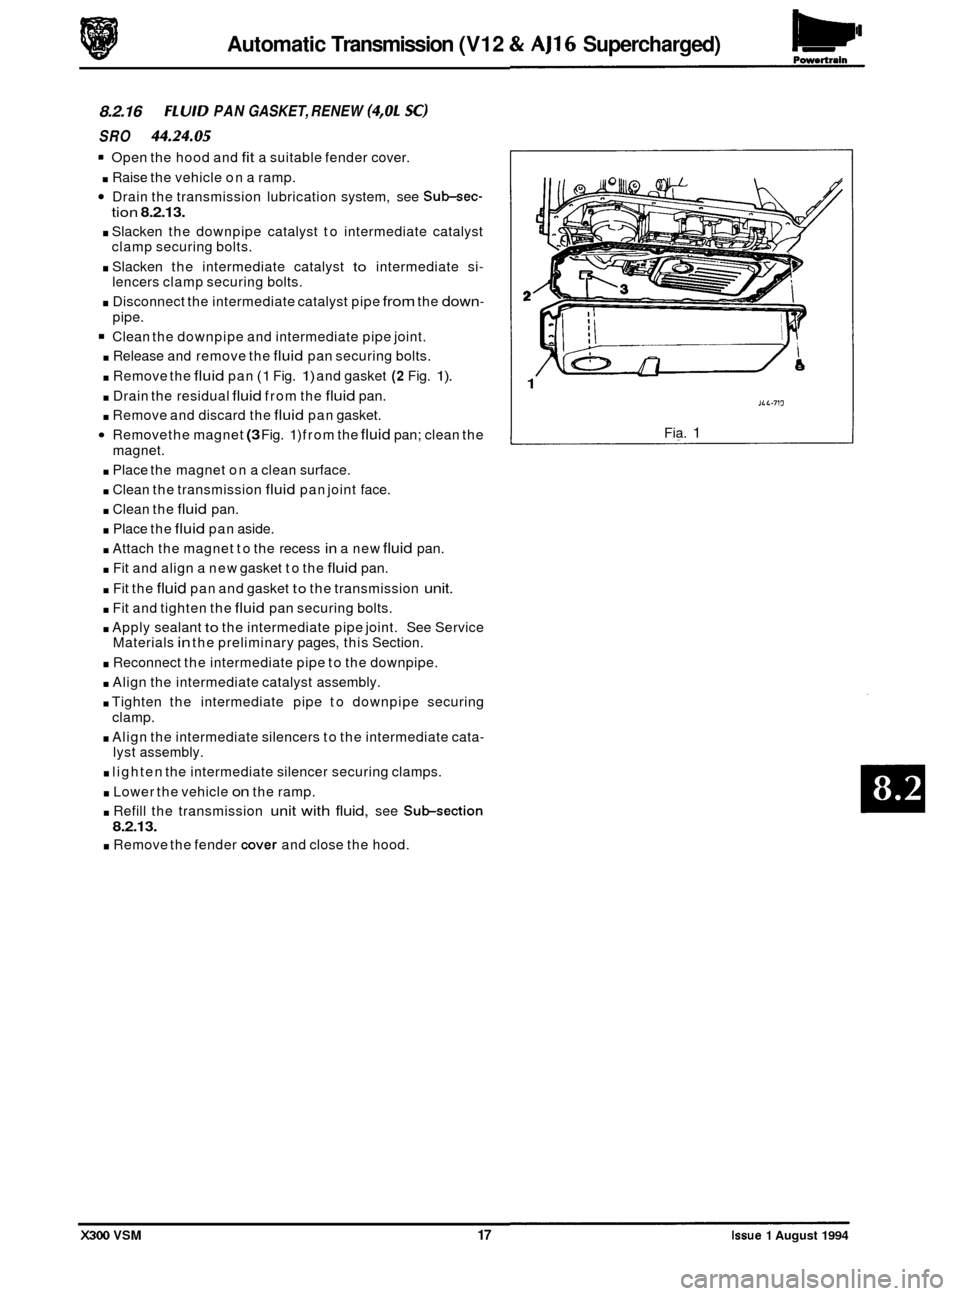 JAGUAR XJ6 1994 2.G Owners Guide Powertrain Automatic Transmission  (V12 & AJ16 Supercharged) 
8.2.16 FLUID PAN GASKET,  RENEW (4,OL SC) 
SRO 44.24.05 
Open the hood  and fit a suitable fender  cover. 
. Raise the vehicle  on a ramp.